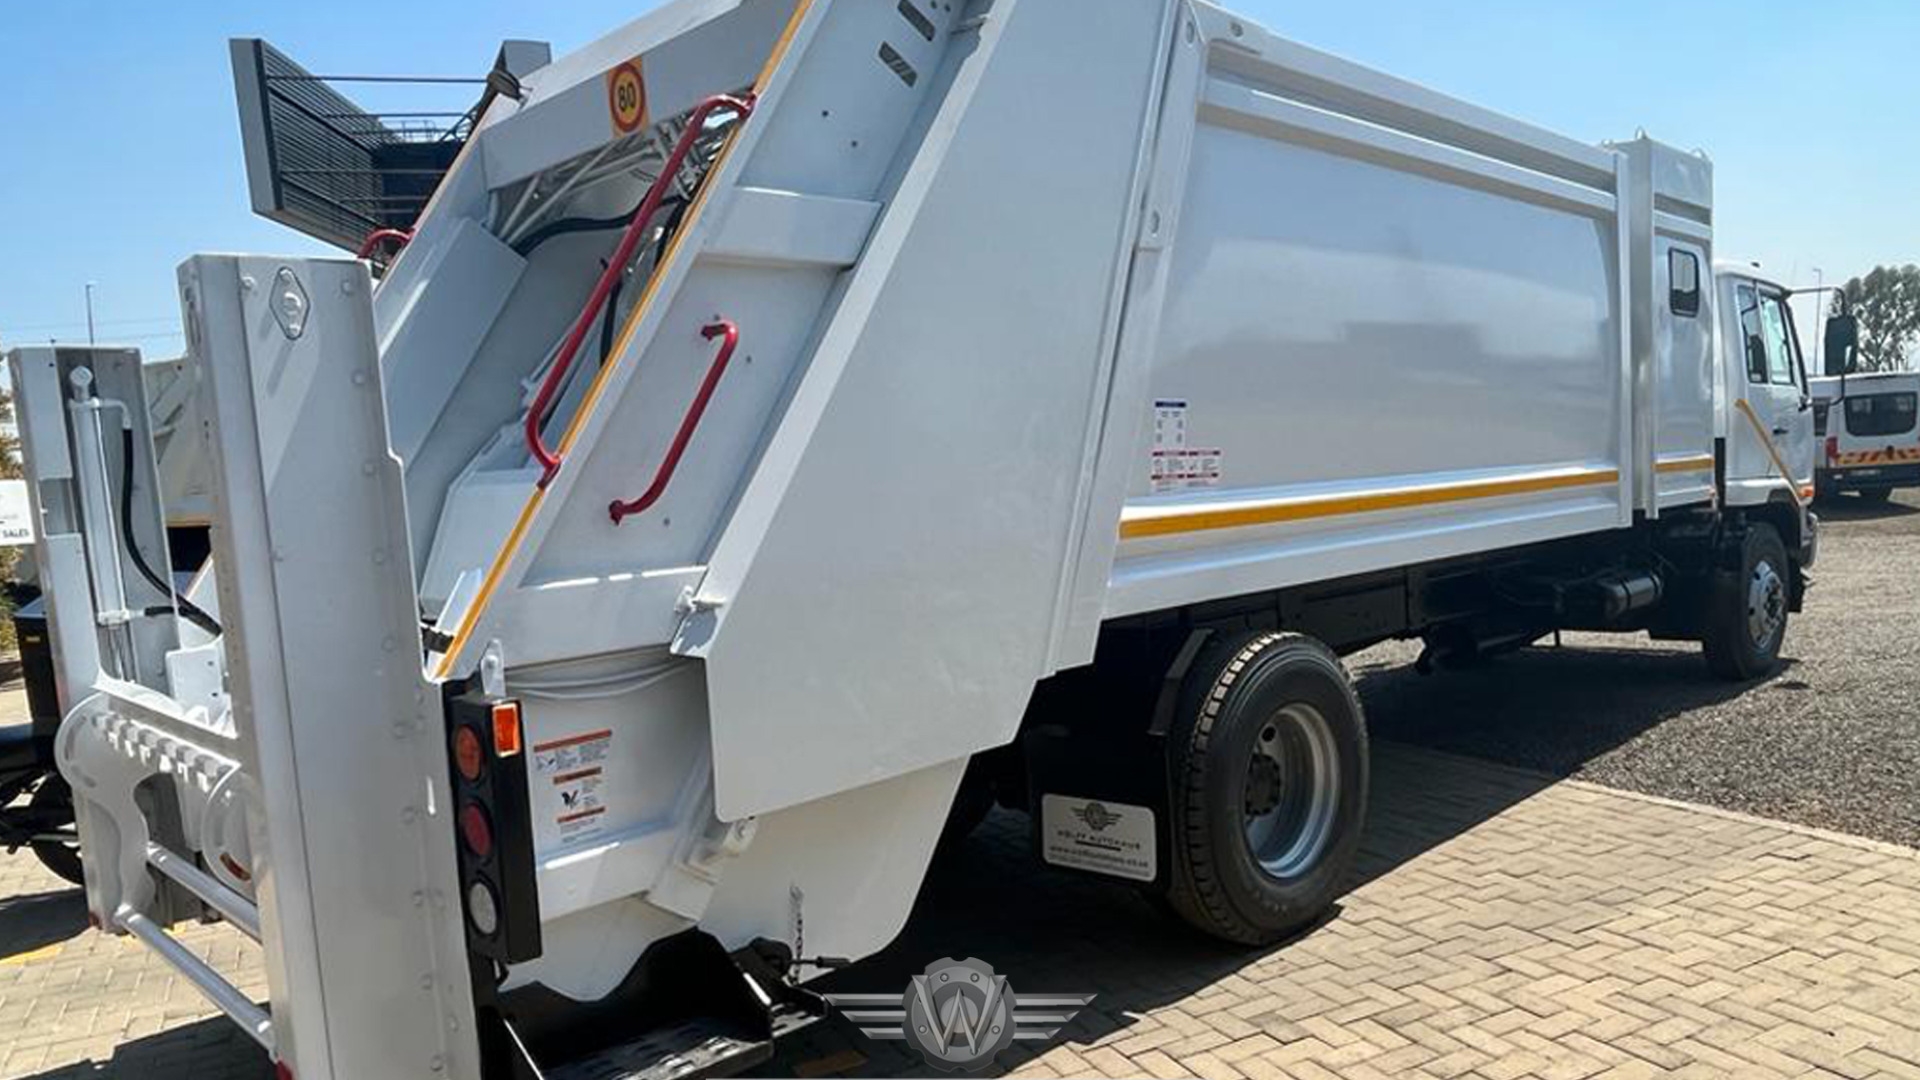 Nissan Garbage trucks UD90 Auto 3Cubic Metre Garbage Compactor 2017 for sale by Wolff Autohaus | Truck & Trailer Marketplace